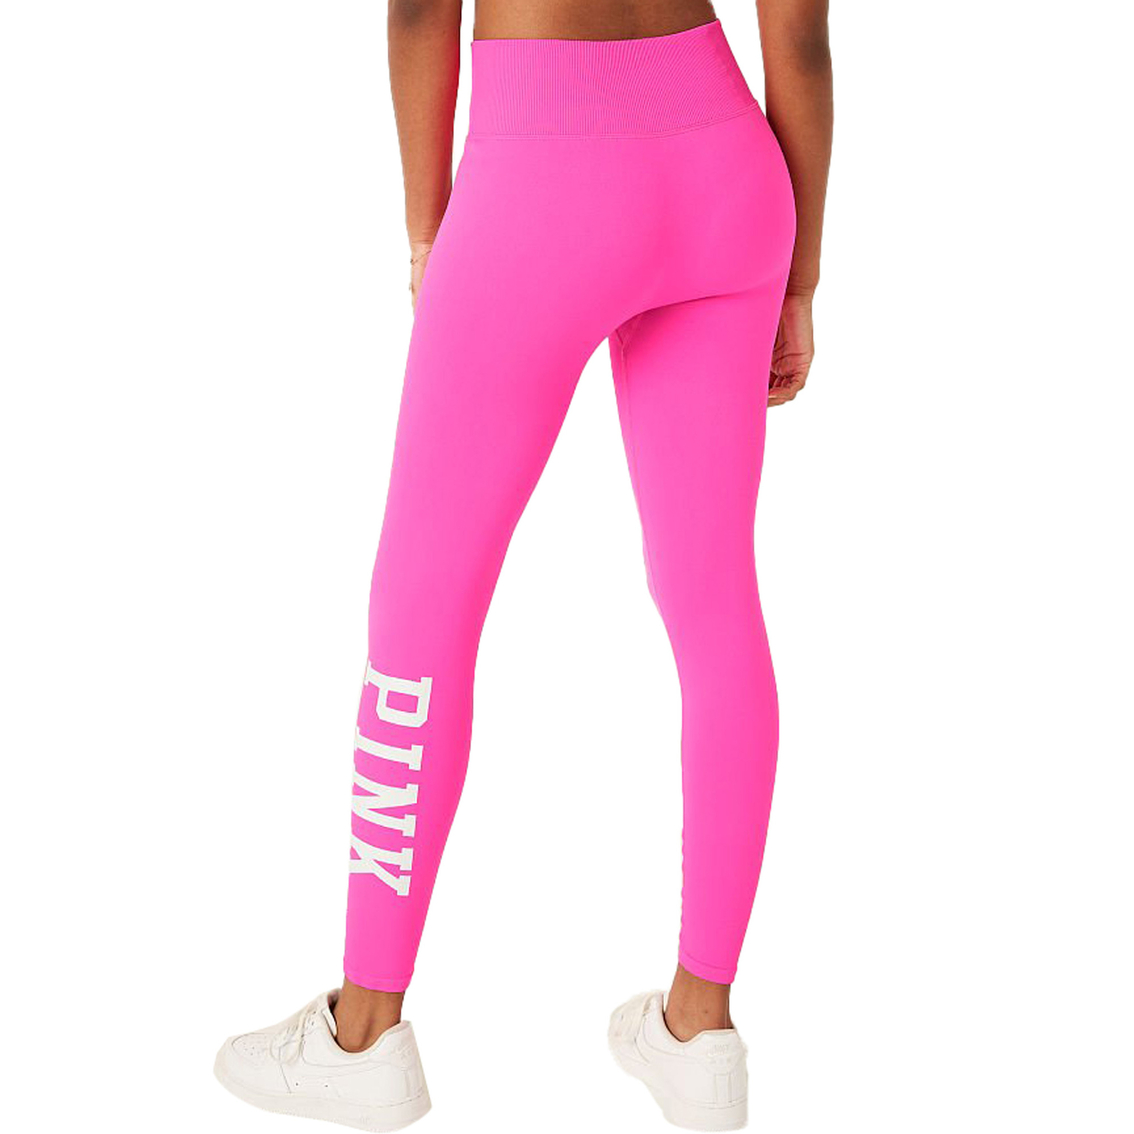 Victoria's Secret Pink Seamless High Waisted Leggings - Image 2 of 4